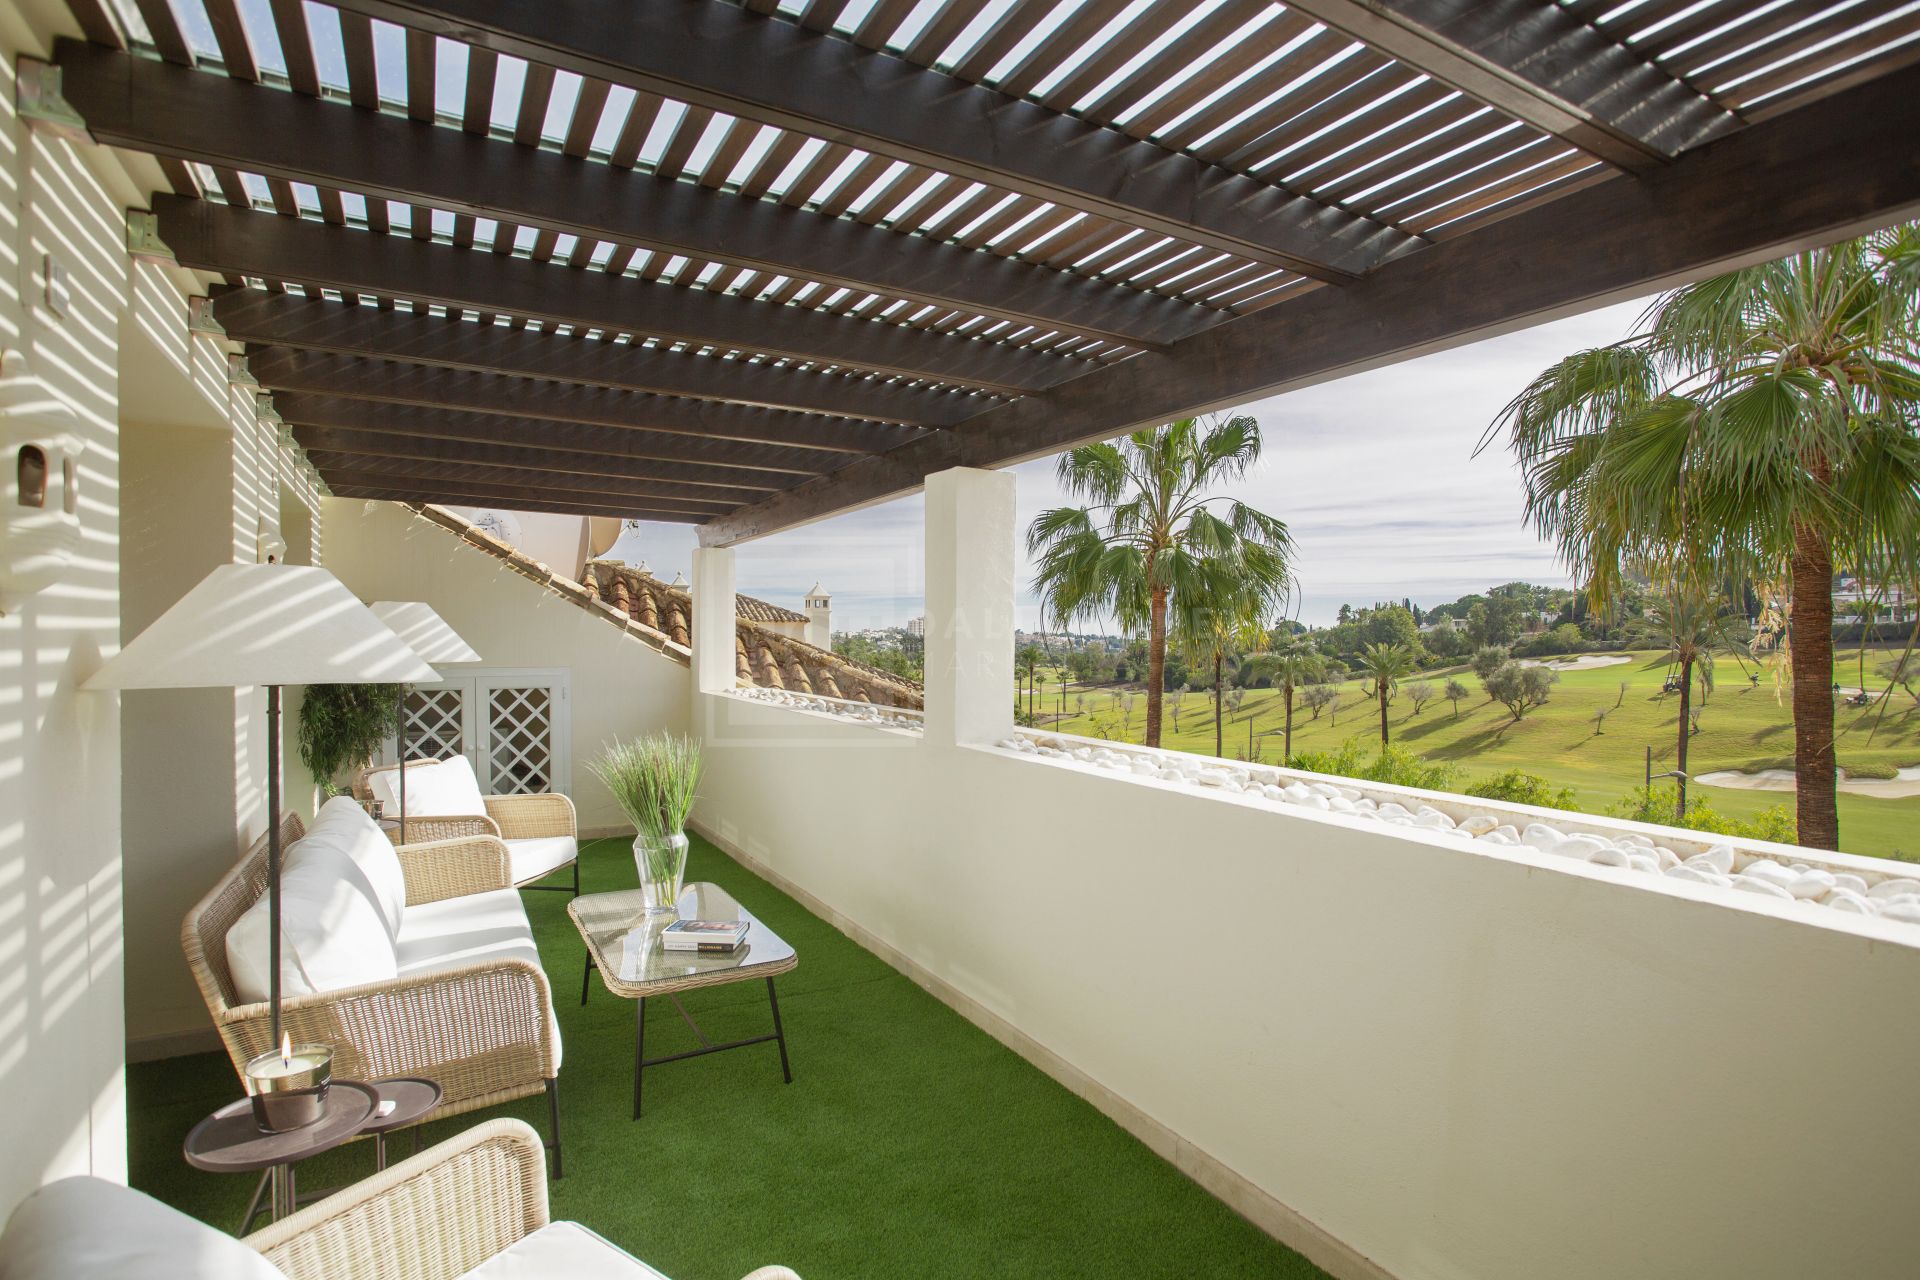 STUNNING DUPLEX PENTHOUSE WITH PRIVATE POOL OVERLOOKING THE GOLF COURSE